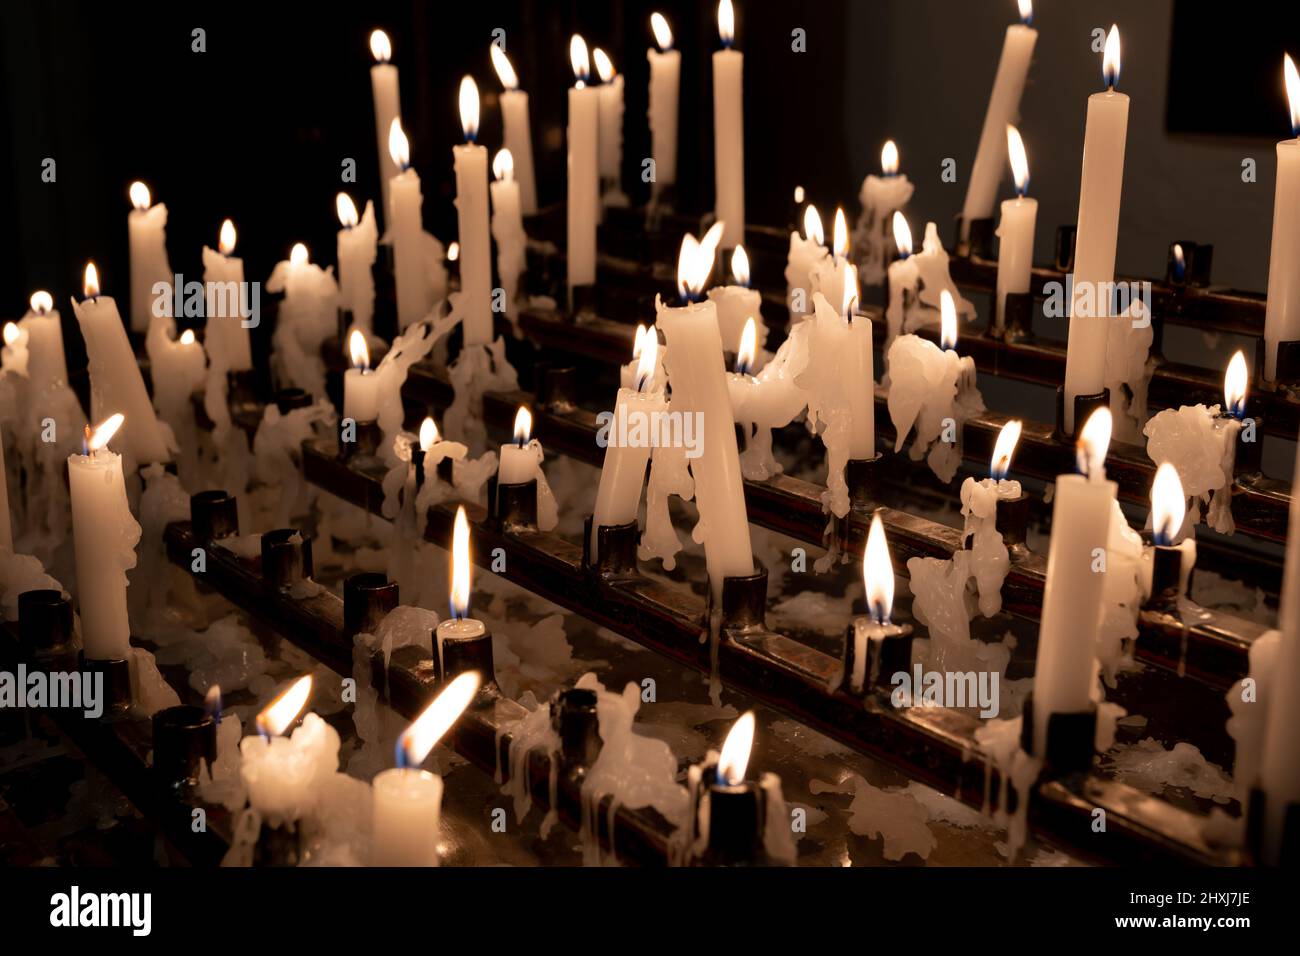 Votive candles or prayer candles rack lit in a church, Christian tradition. Stock Photo